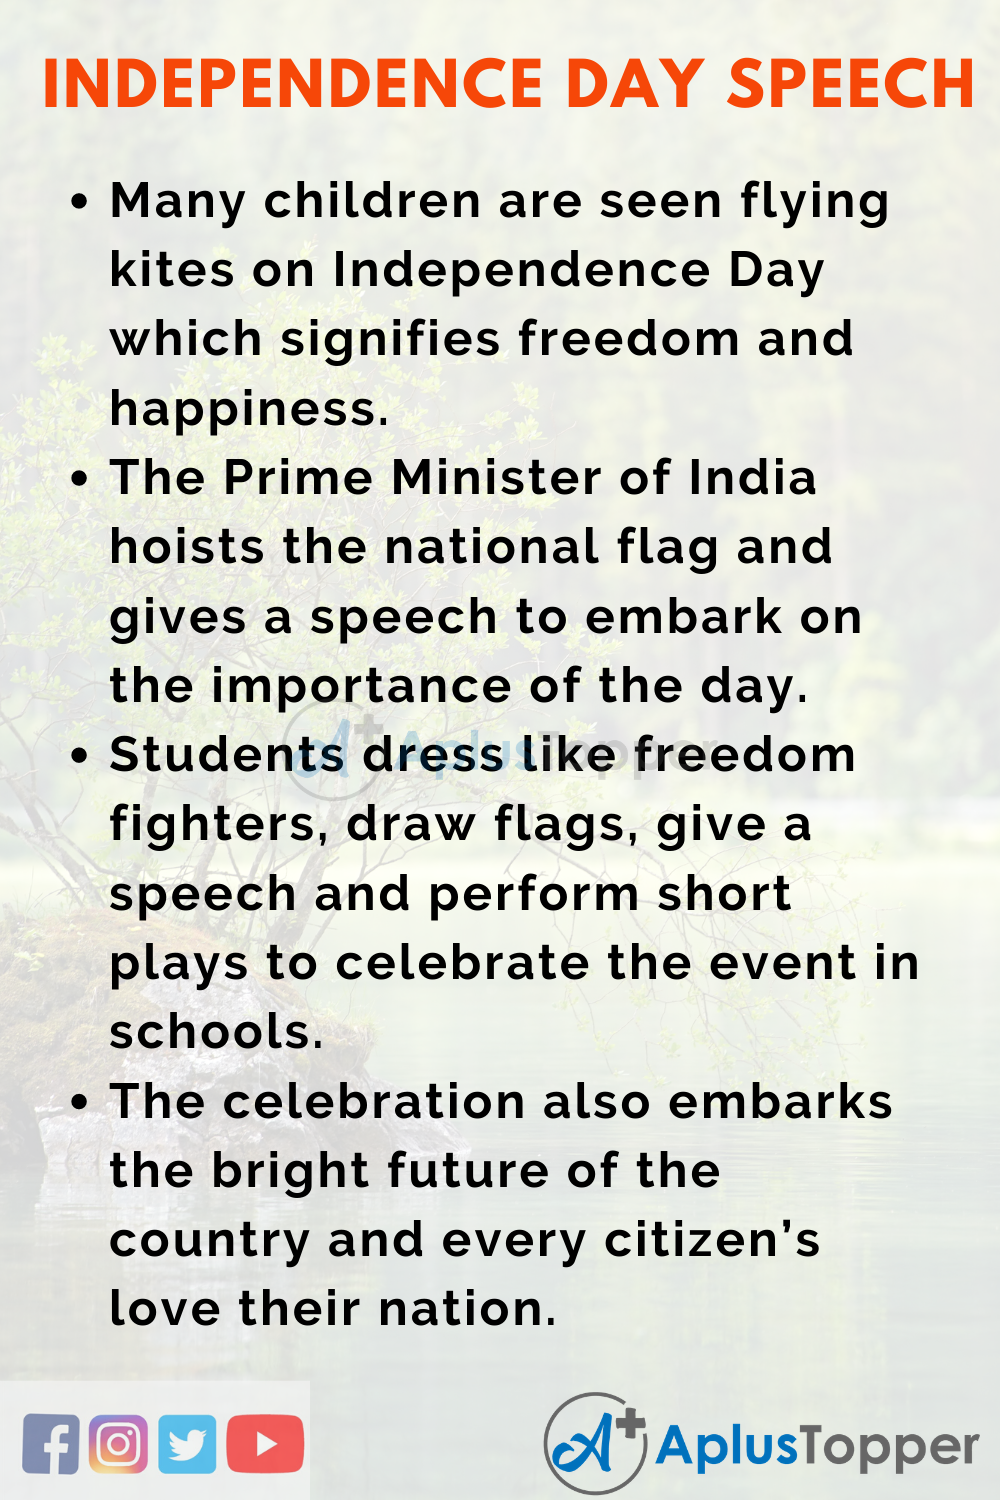 Independence Day Speech for Teachers in 300 and 600 Words for Students in  English - A Plus Topper